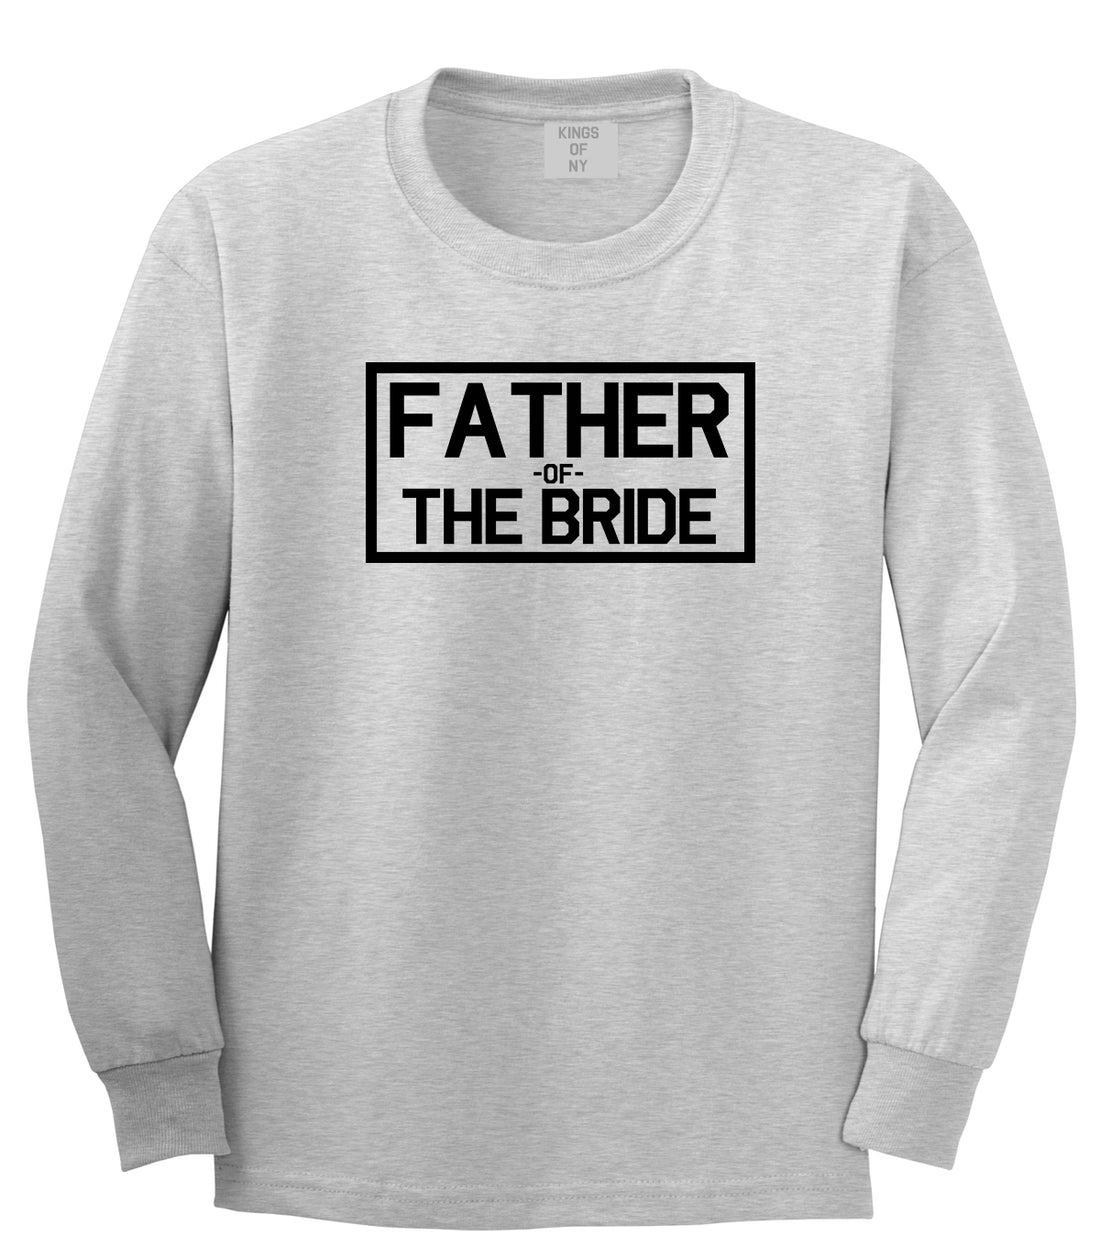 Father Of The Bride Mens Grey Long Sleeve T-Shirt by Kings Of NY